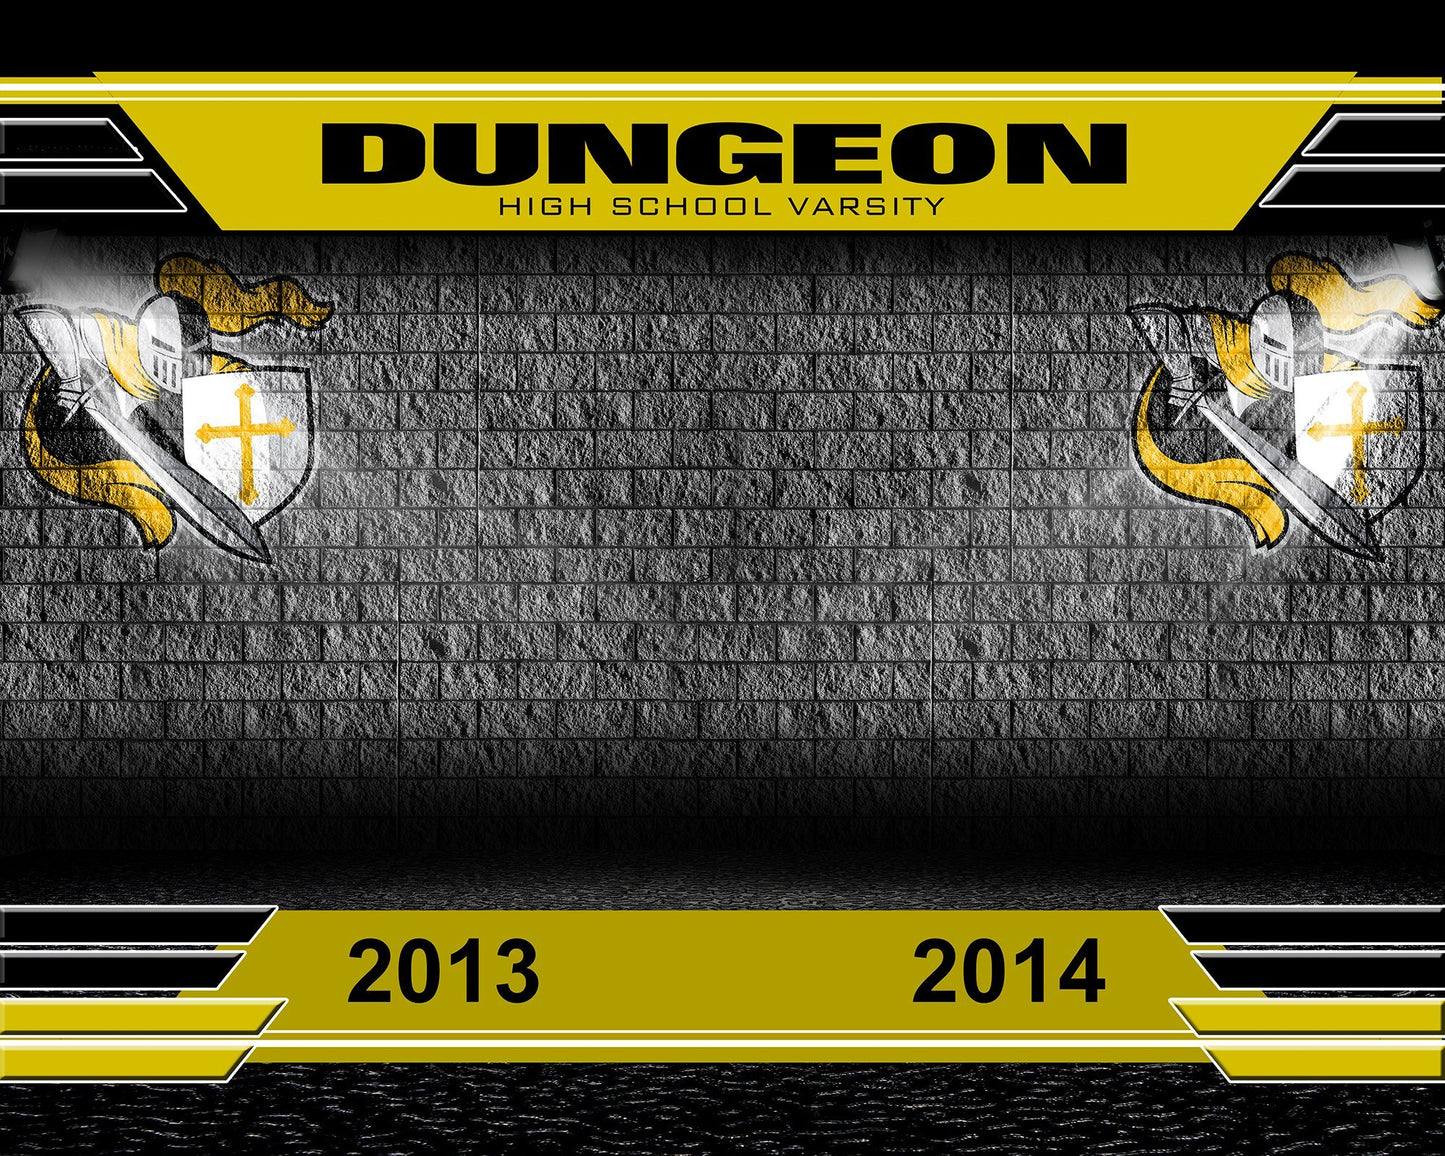 Dungeon v.2 - Xtreme Team-Photoshop Template - Photo Solutions